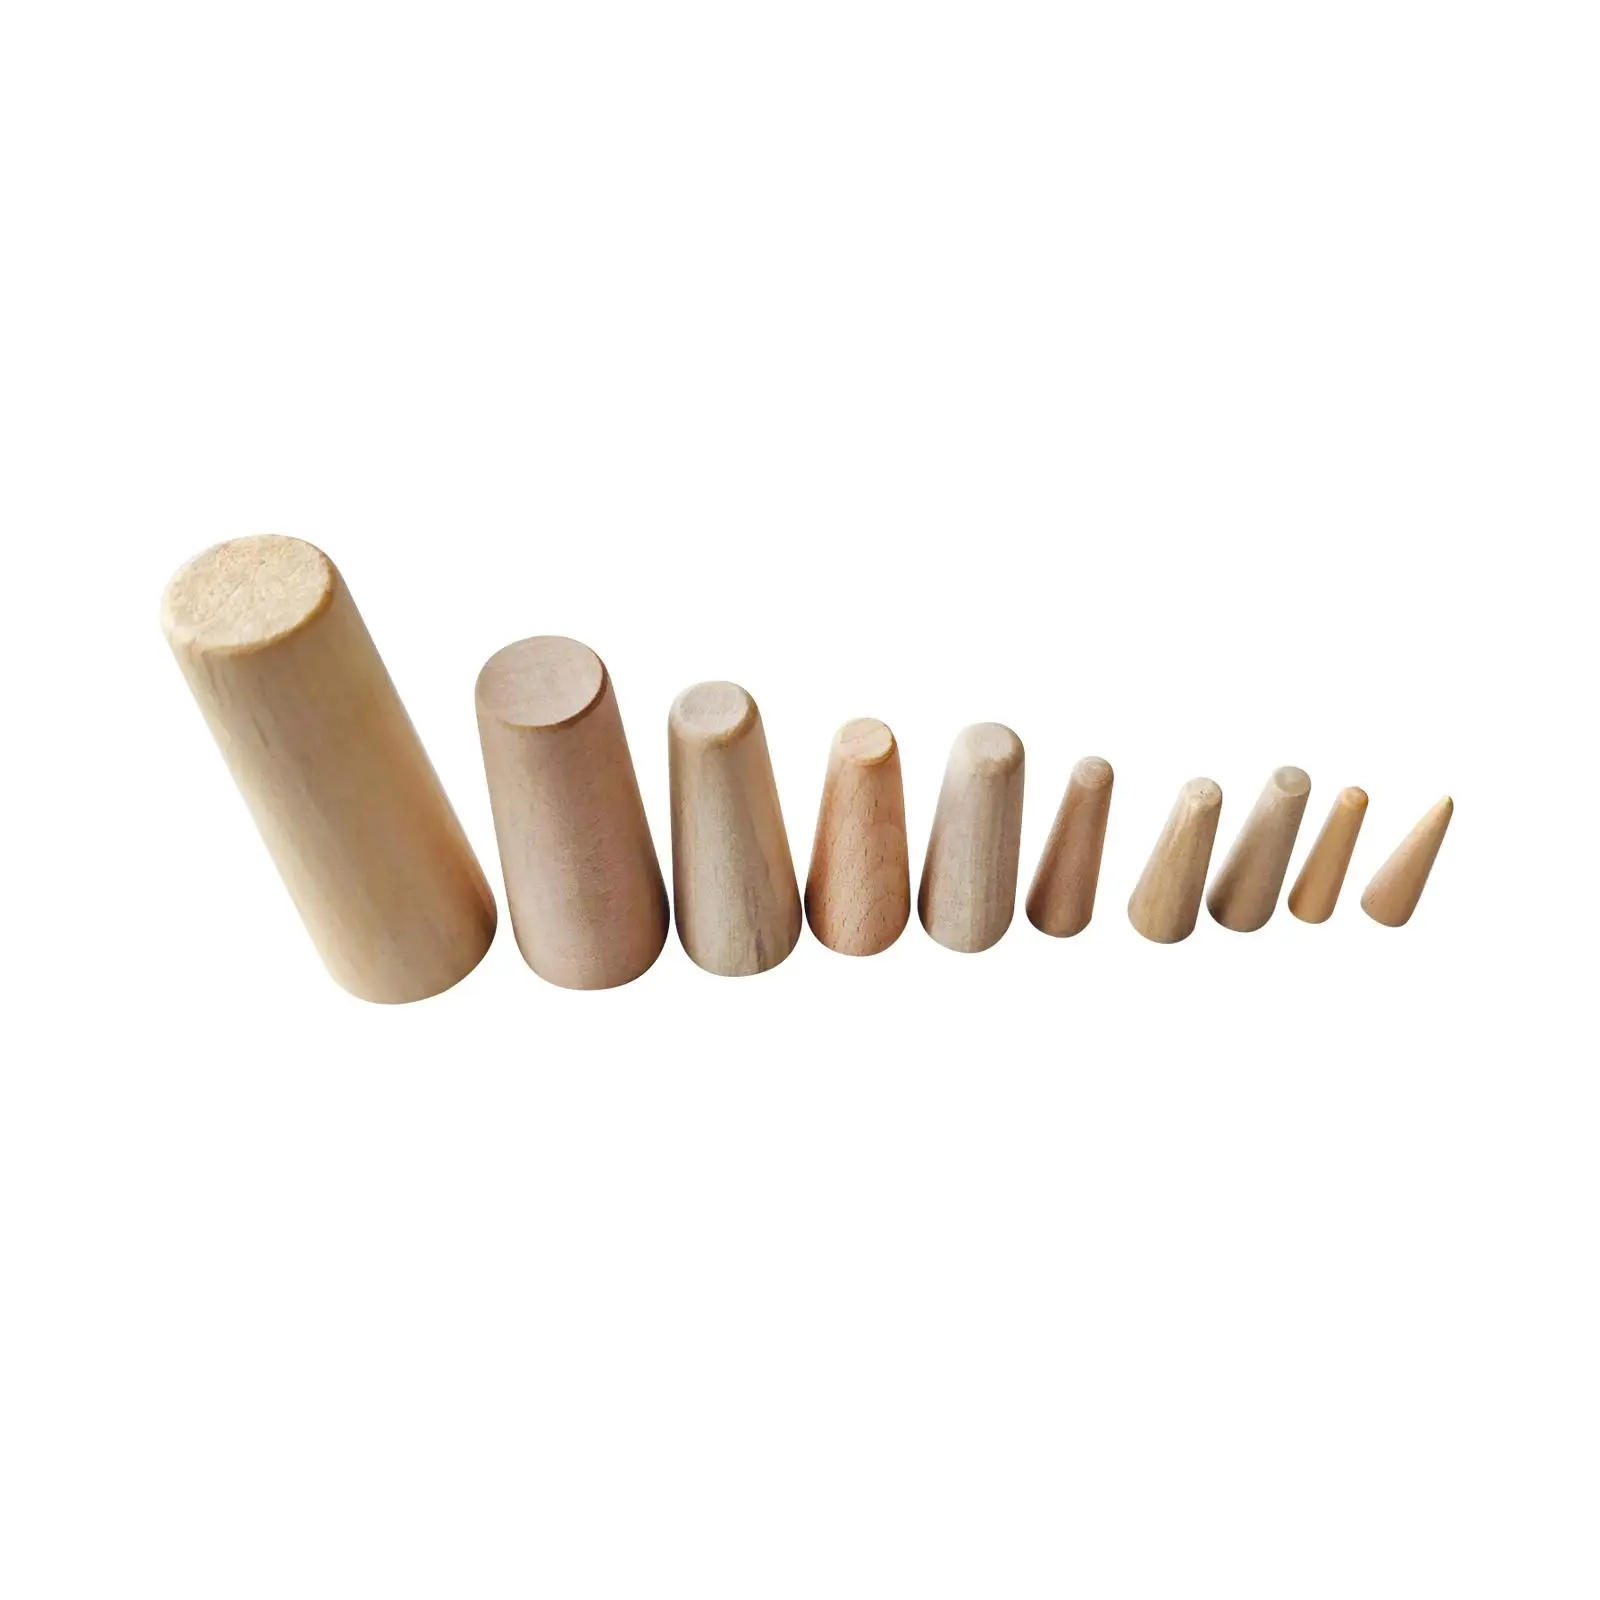 10Pcs Boat Emergency Wood Plugs Stopgap Stops Emergency Leaks Assorted Soft Conical Tapered Wooden Bungs for Marine Boat Pipes